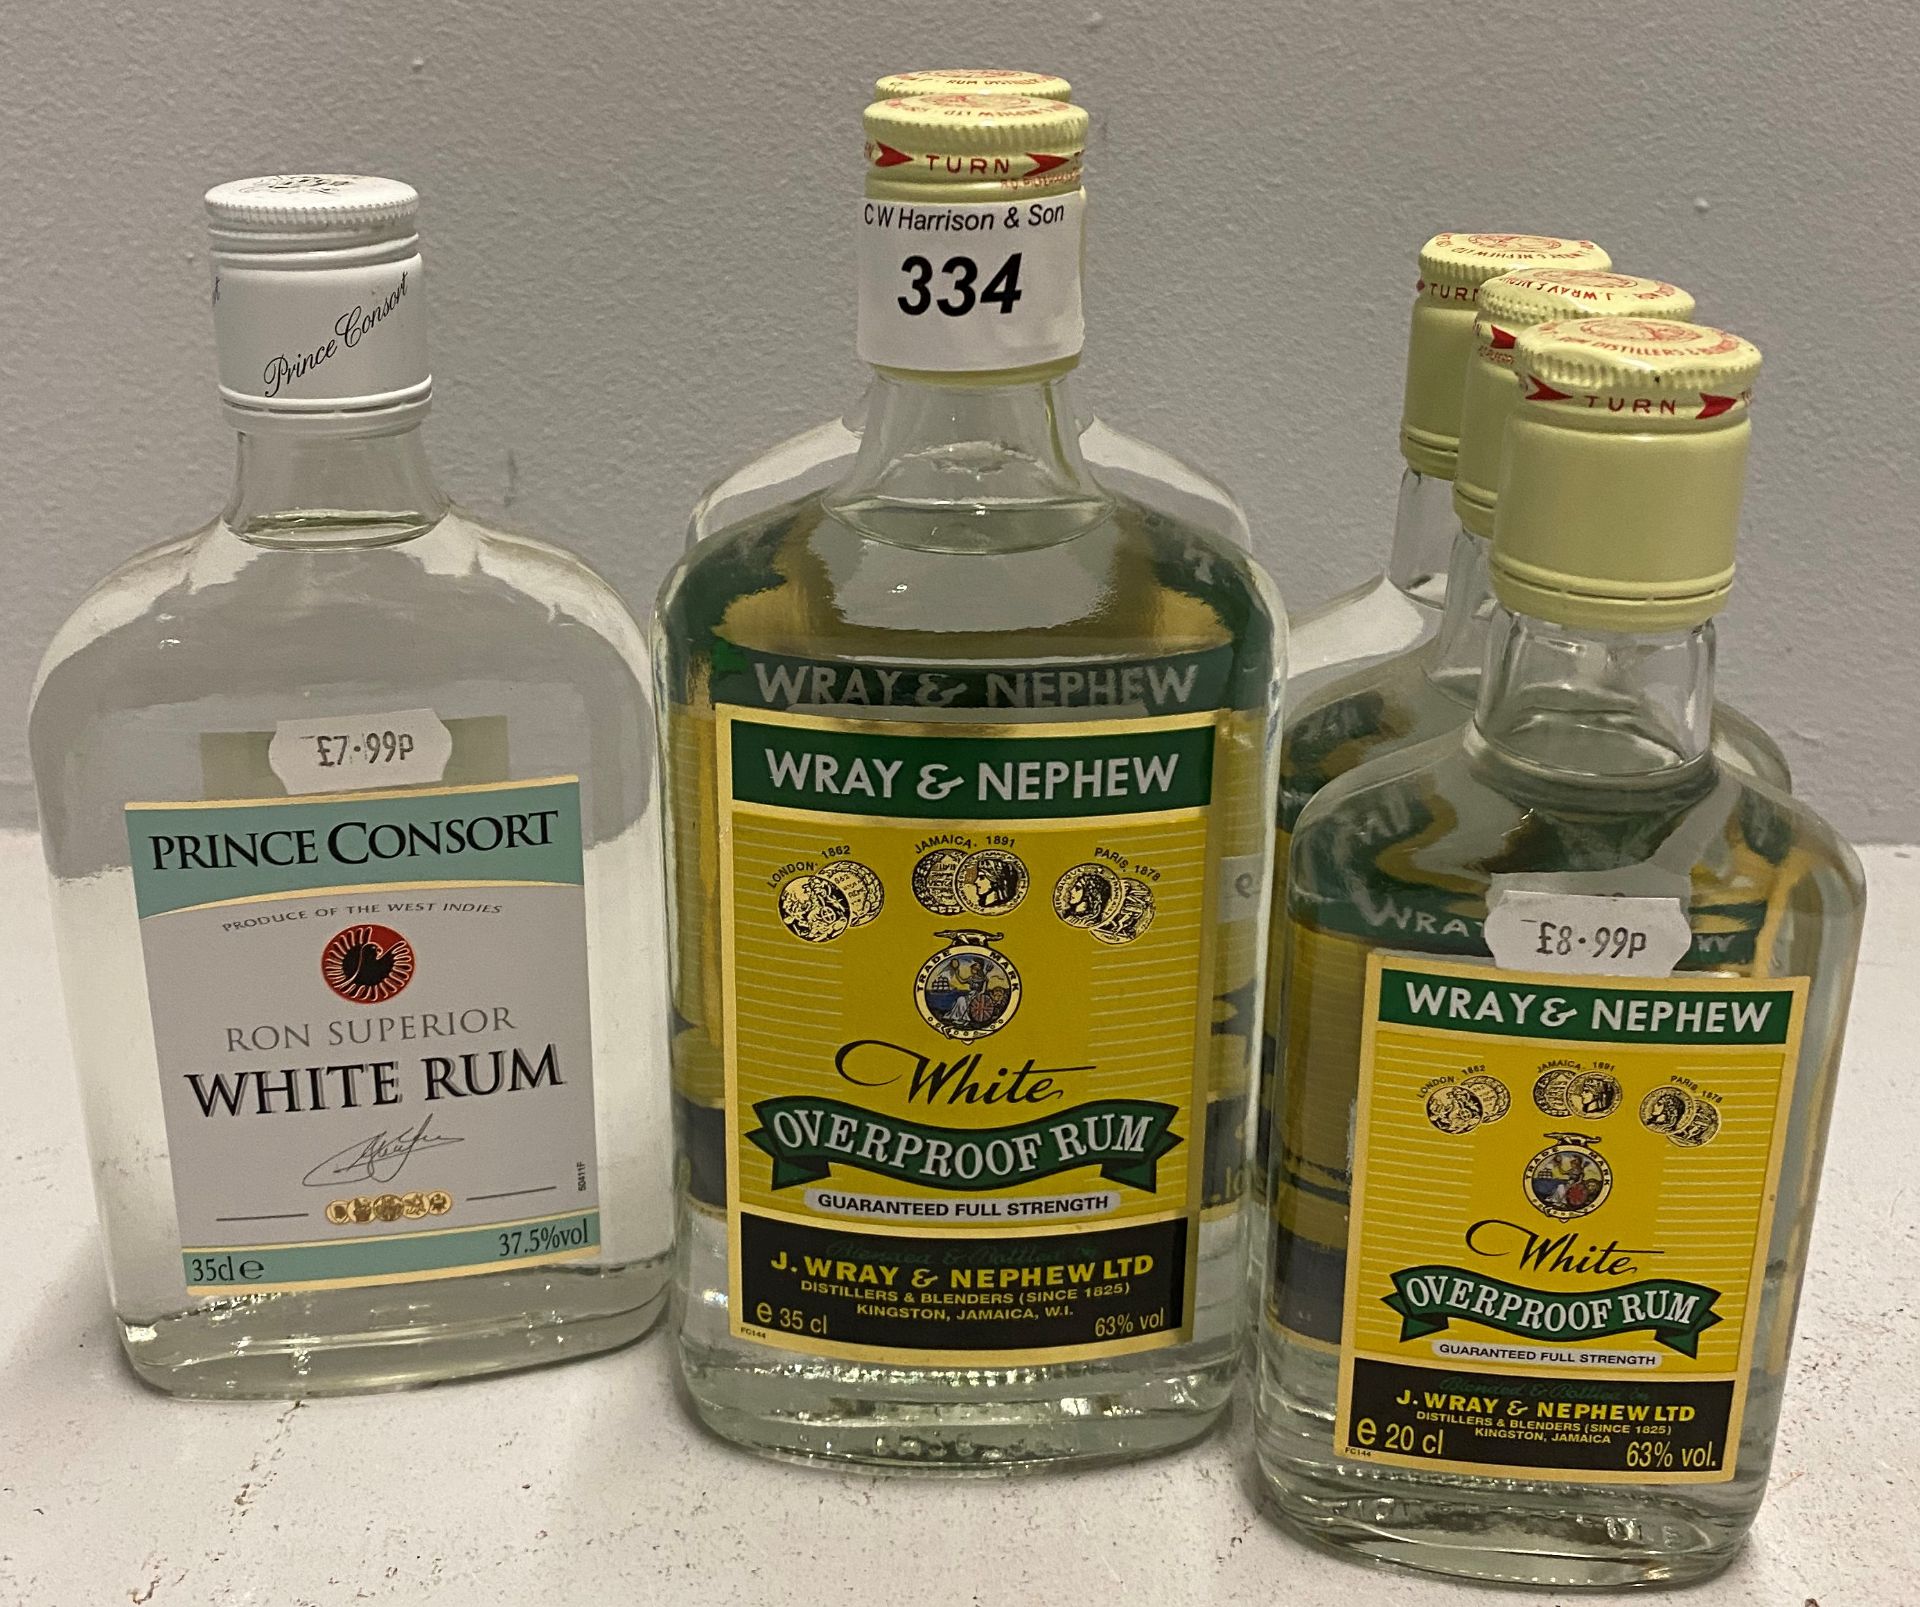 6 x assorted bottles of Rum - 2 x 35cl and 3 x 20cl bottles of Wray & Nephew Overproof Rum and a